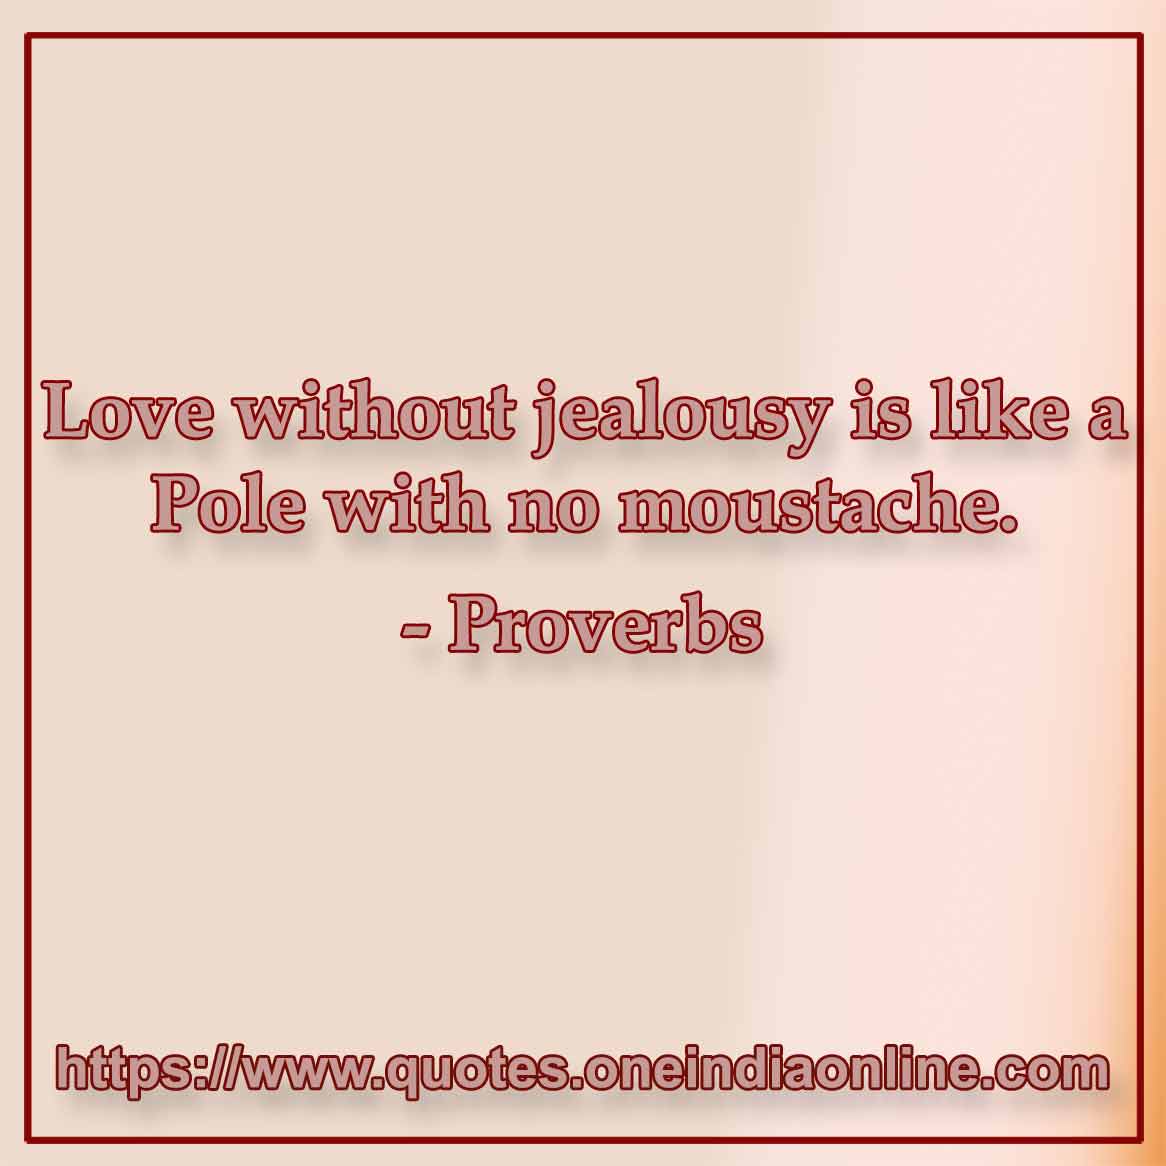 Love without jealousy is like a Pole with no moustache.